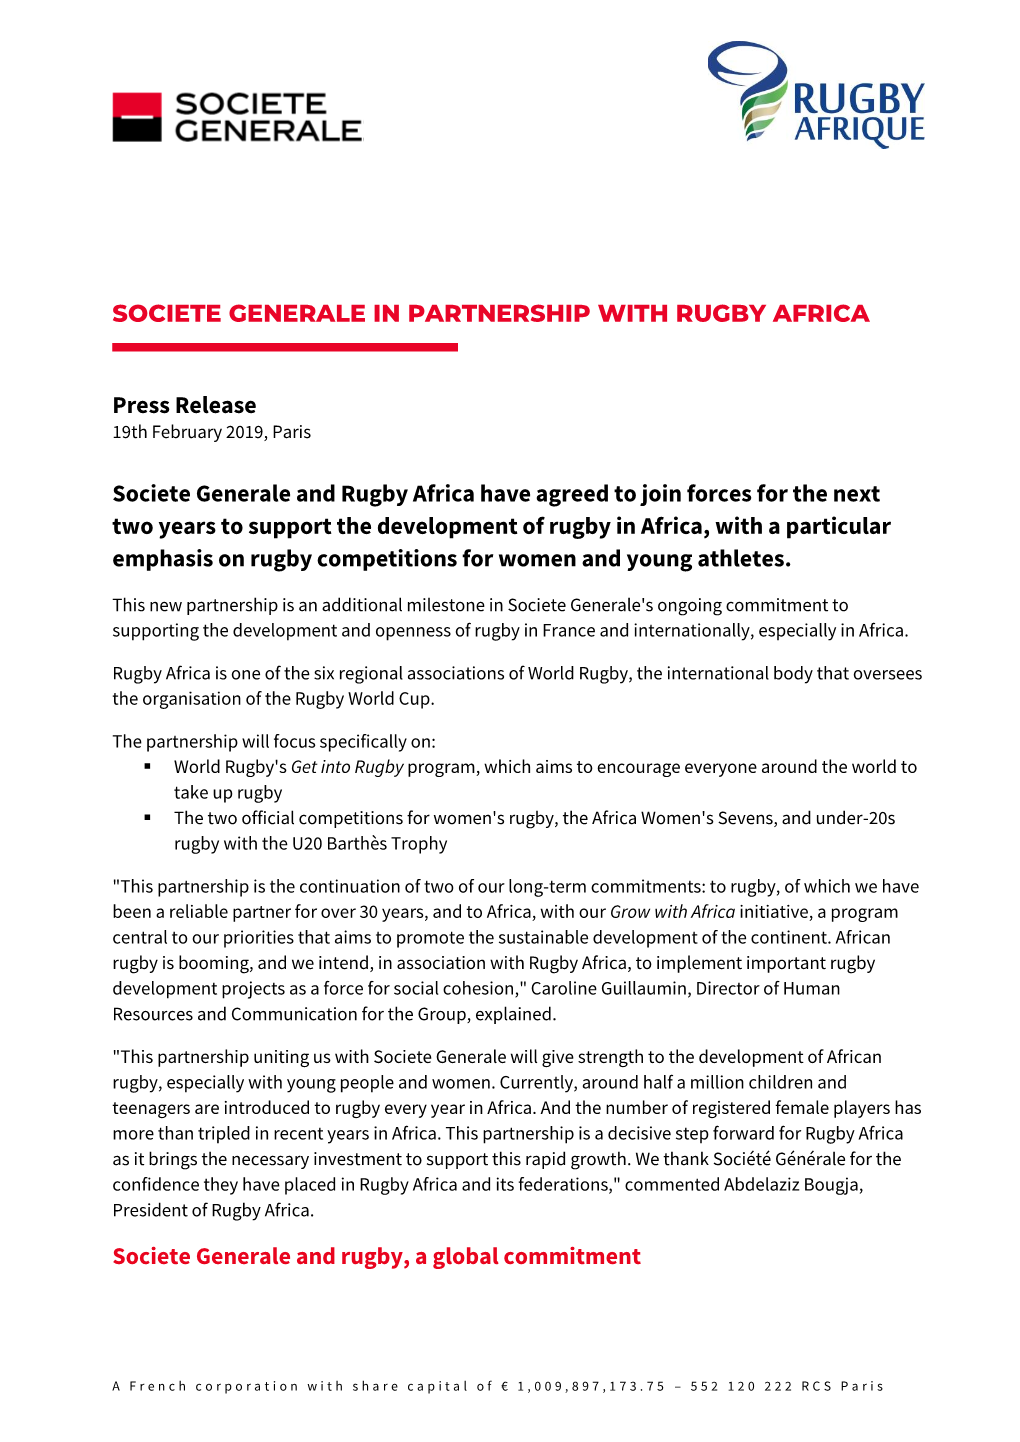 Societe Generale in Partnership with Rugby Africa